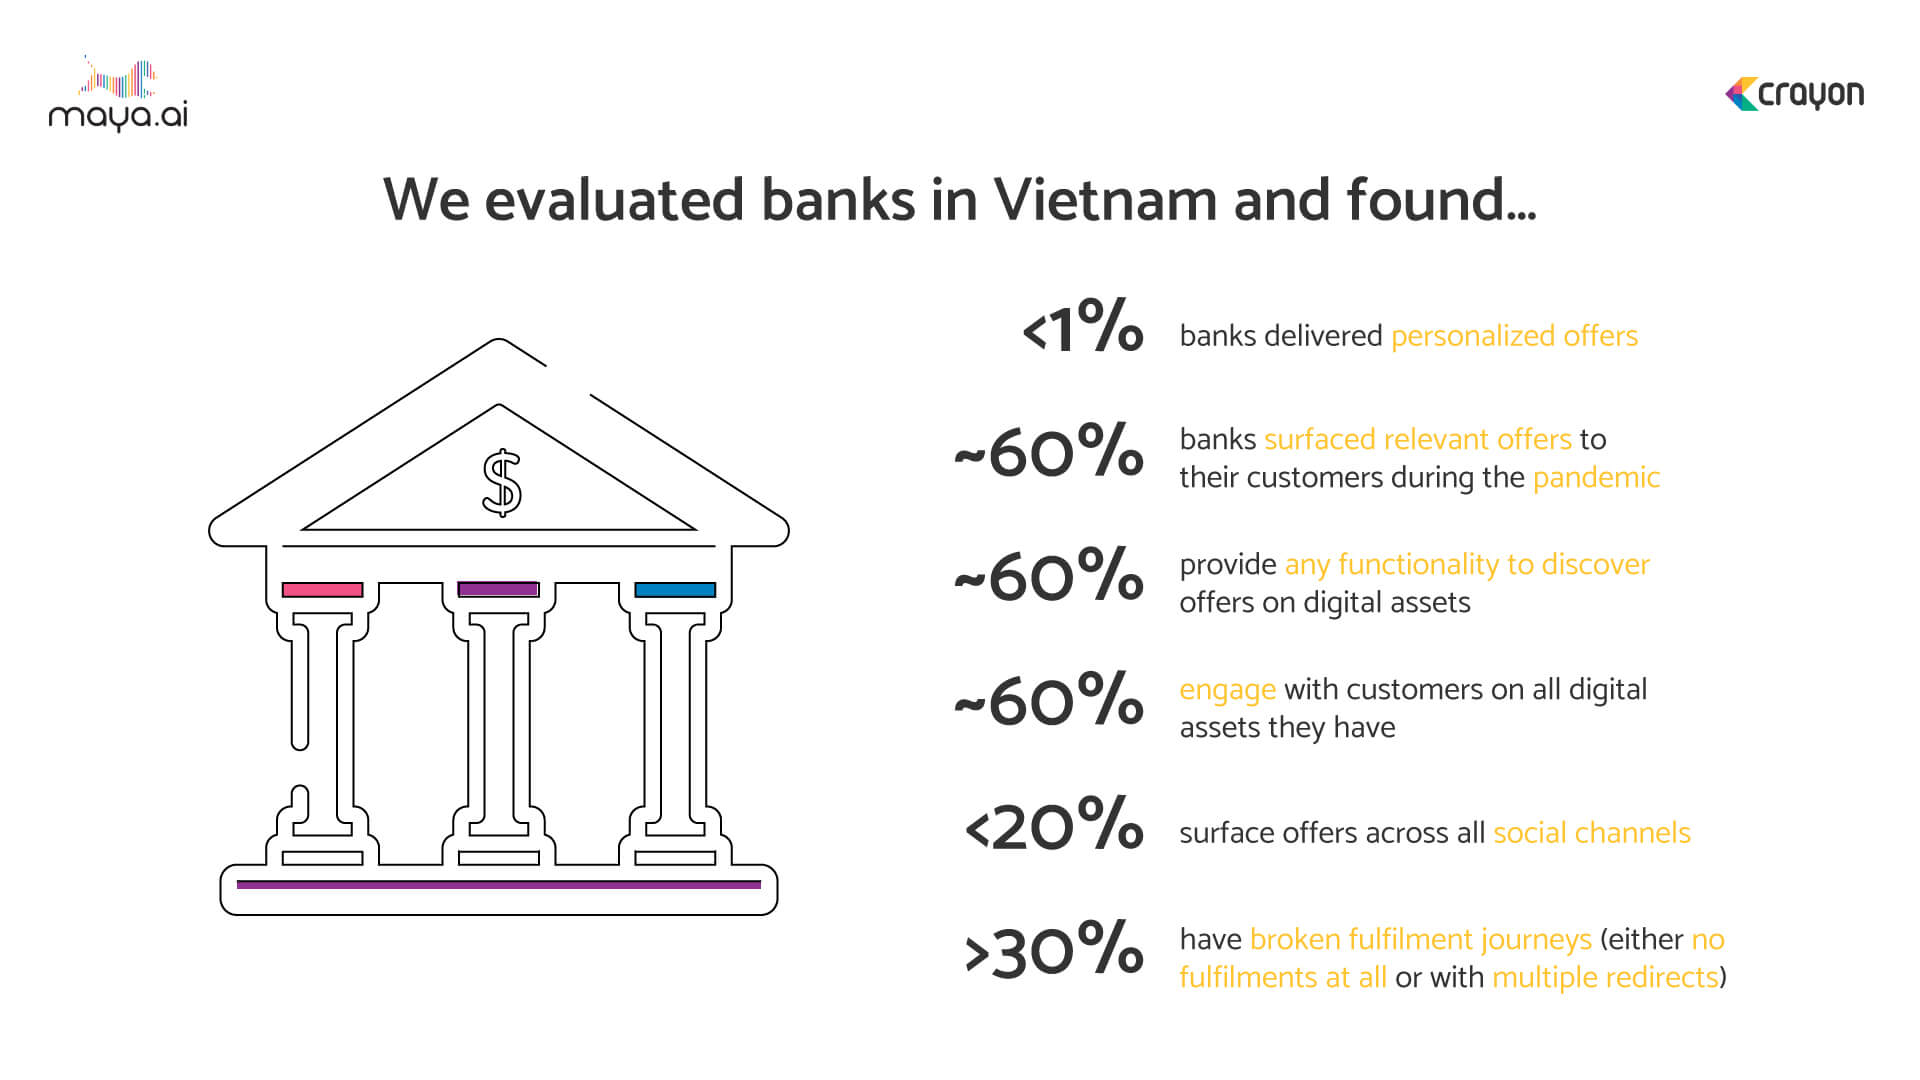 traditional banks in Vietnam